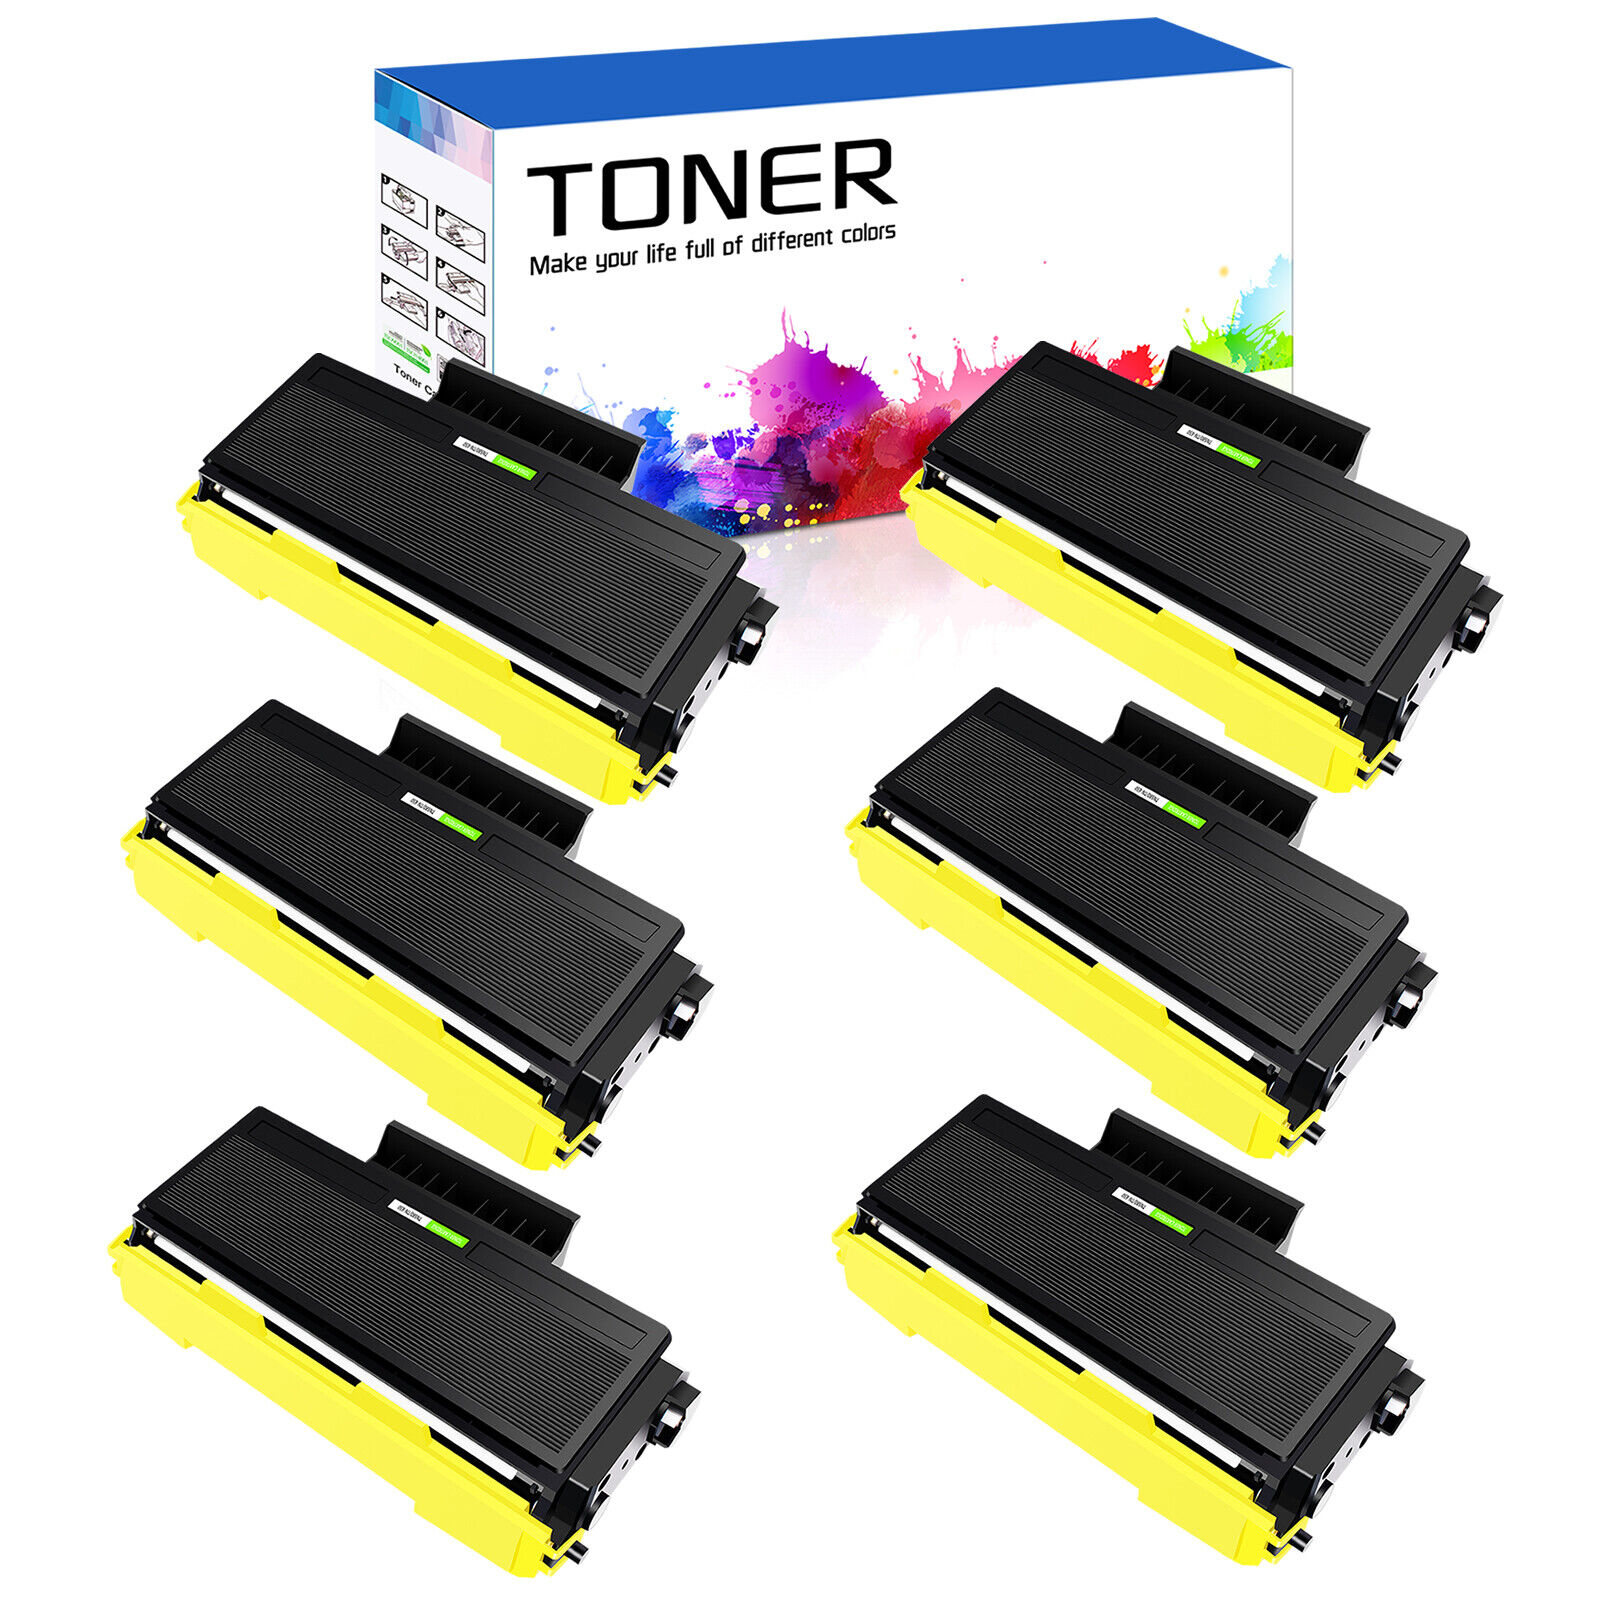 6PK TN580 TN650 Toner For Brother DCP-8060 DCP-8065 DCP-8065DN HL-5200 HL-5240LT